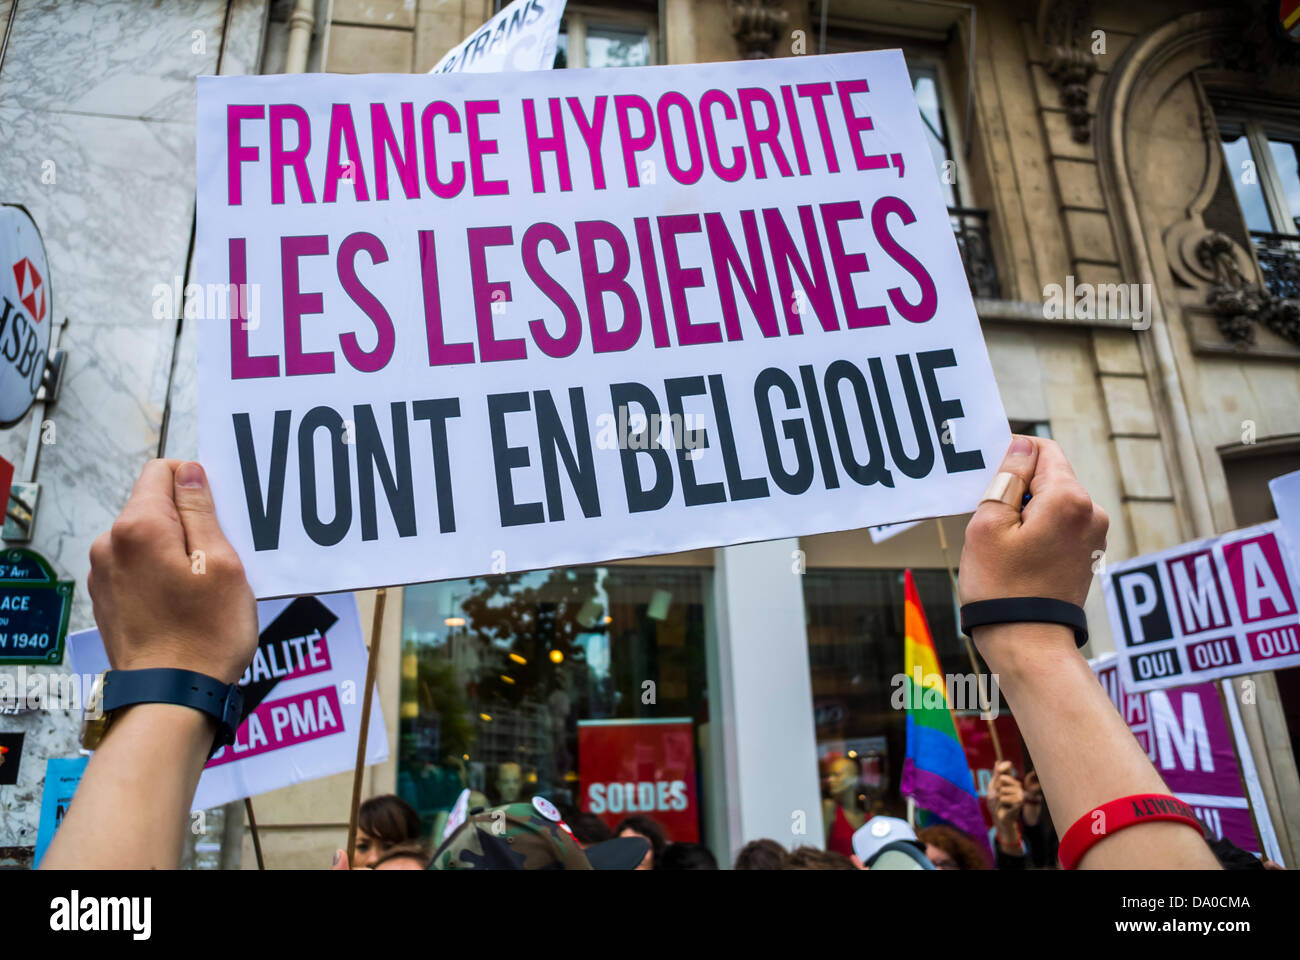 Paris, France, LGBT Groups Protesting in Annual Gay Pride March,  French Sign: 'France Hypocrite, Lesbians g-o to Belgium' (For Right to Artificial Insemination) ( Collective 'Oui, Oui, Oui') gay rights struggle Stock Photo